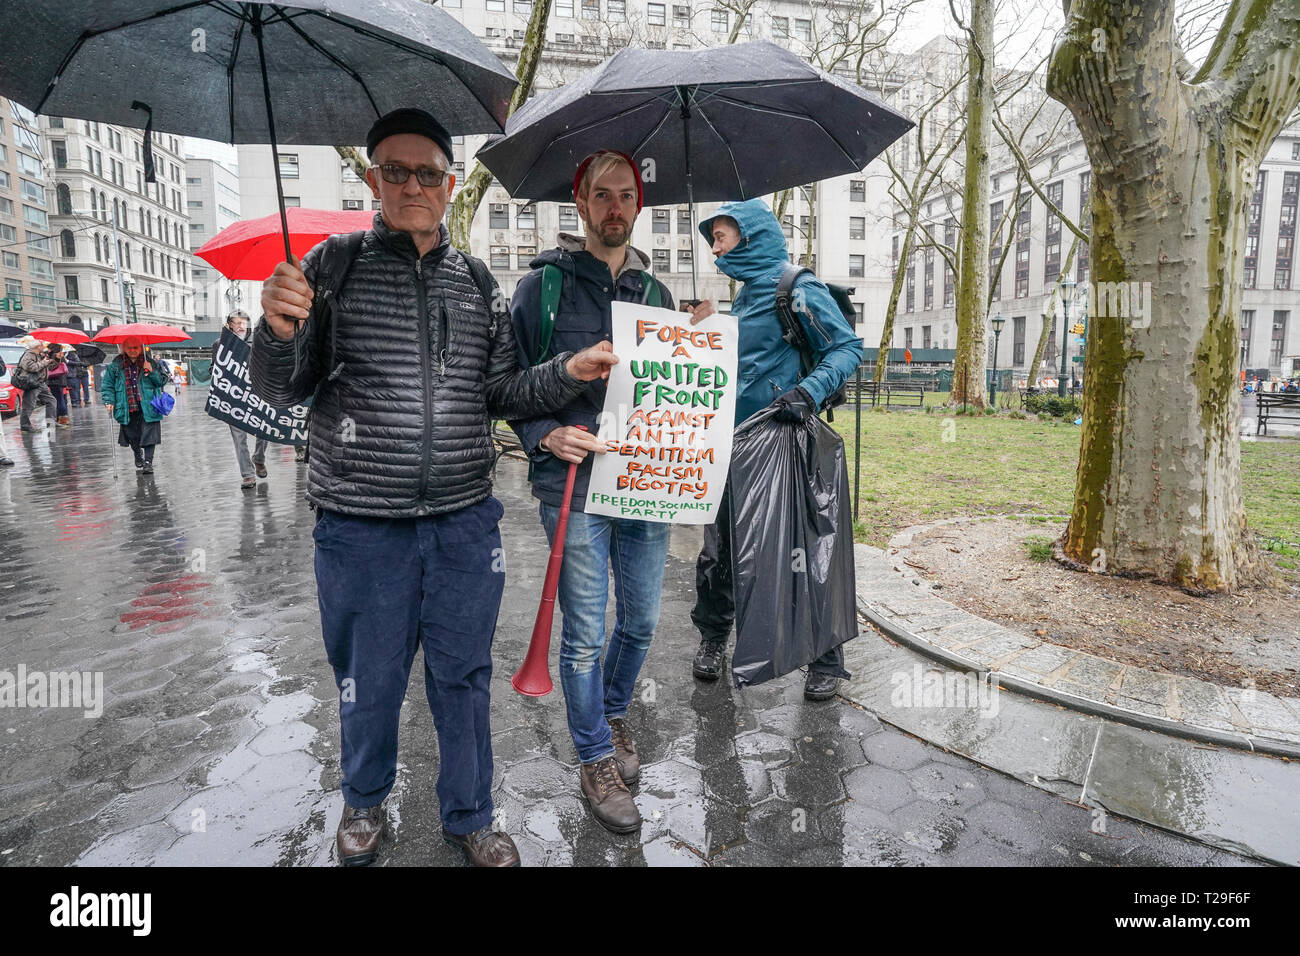 New York, United States. 31st Mar, 2019. New York, NY - March 31, 2019: Rise and Resist members hold rally Against Hate and Holocaust Revisionism as counter protest for rally organized by Polish Americans at Federal Plaza Credit: lev radin/Alamy Live News Stock Photo